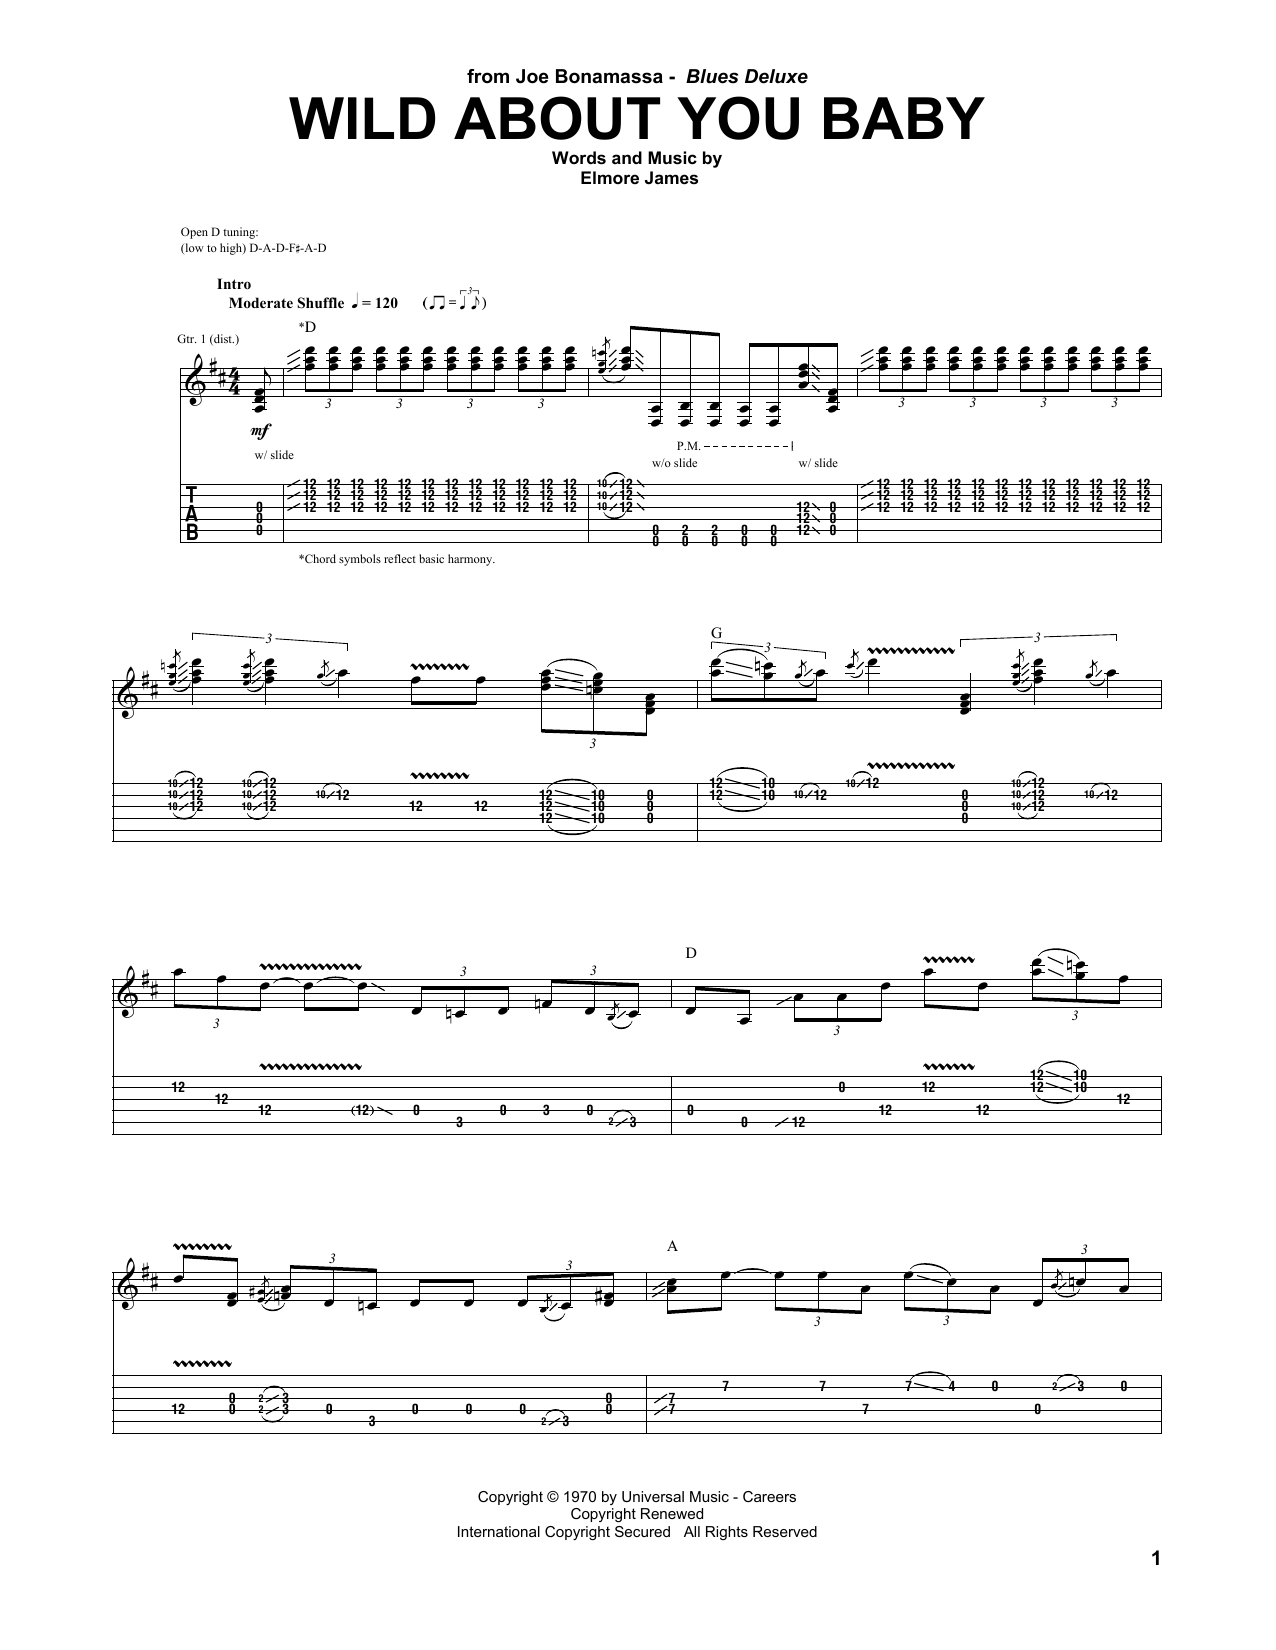 Joe Bonamassa Wild About You Baby sheet music preview music notes and score for Guitar Tab including 10 page(s)